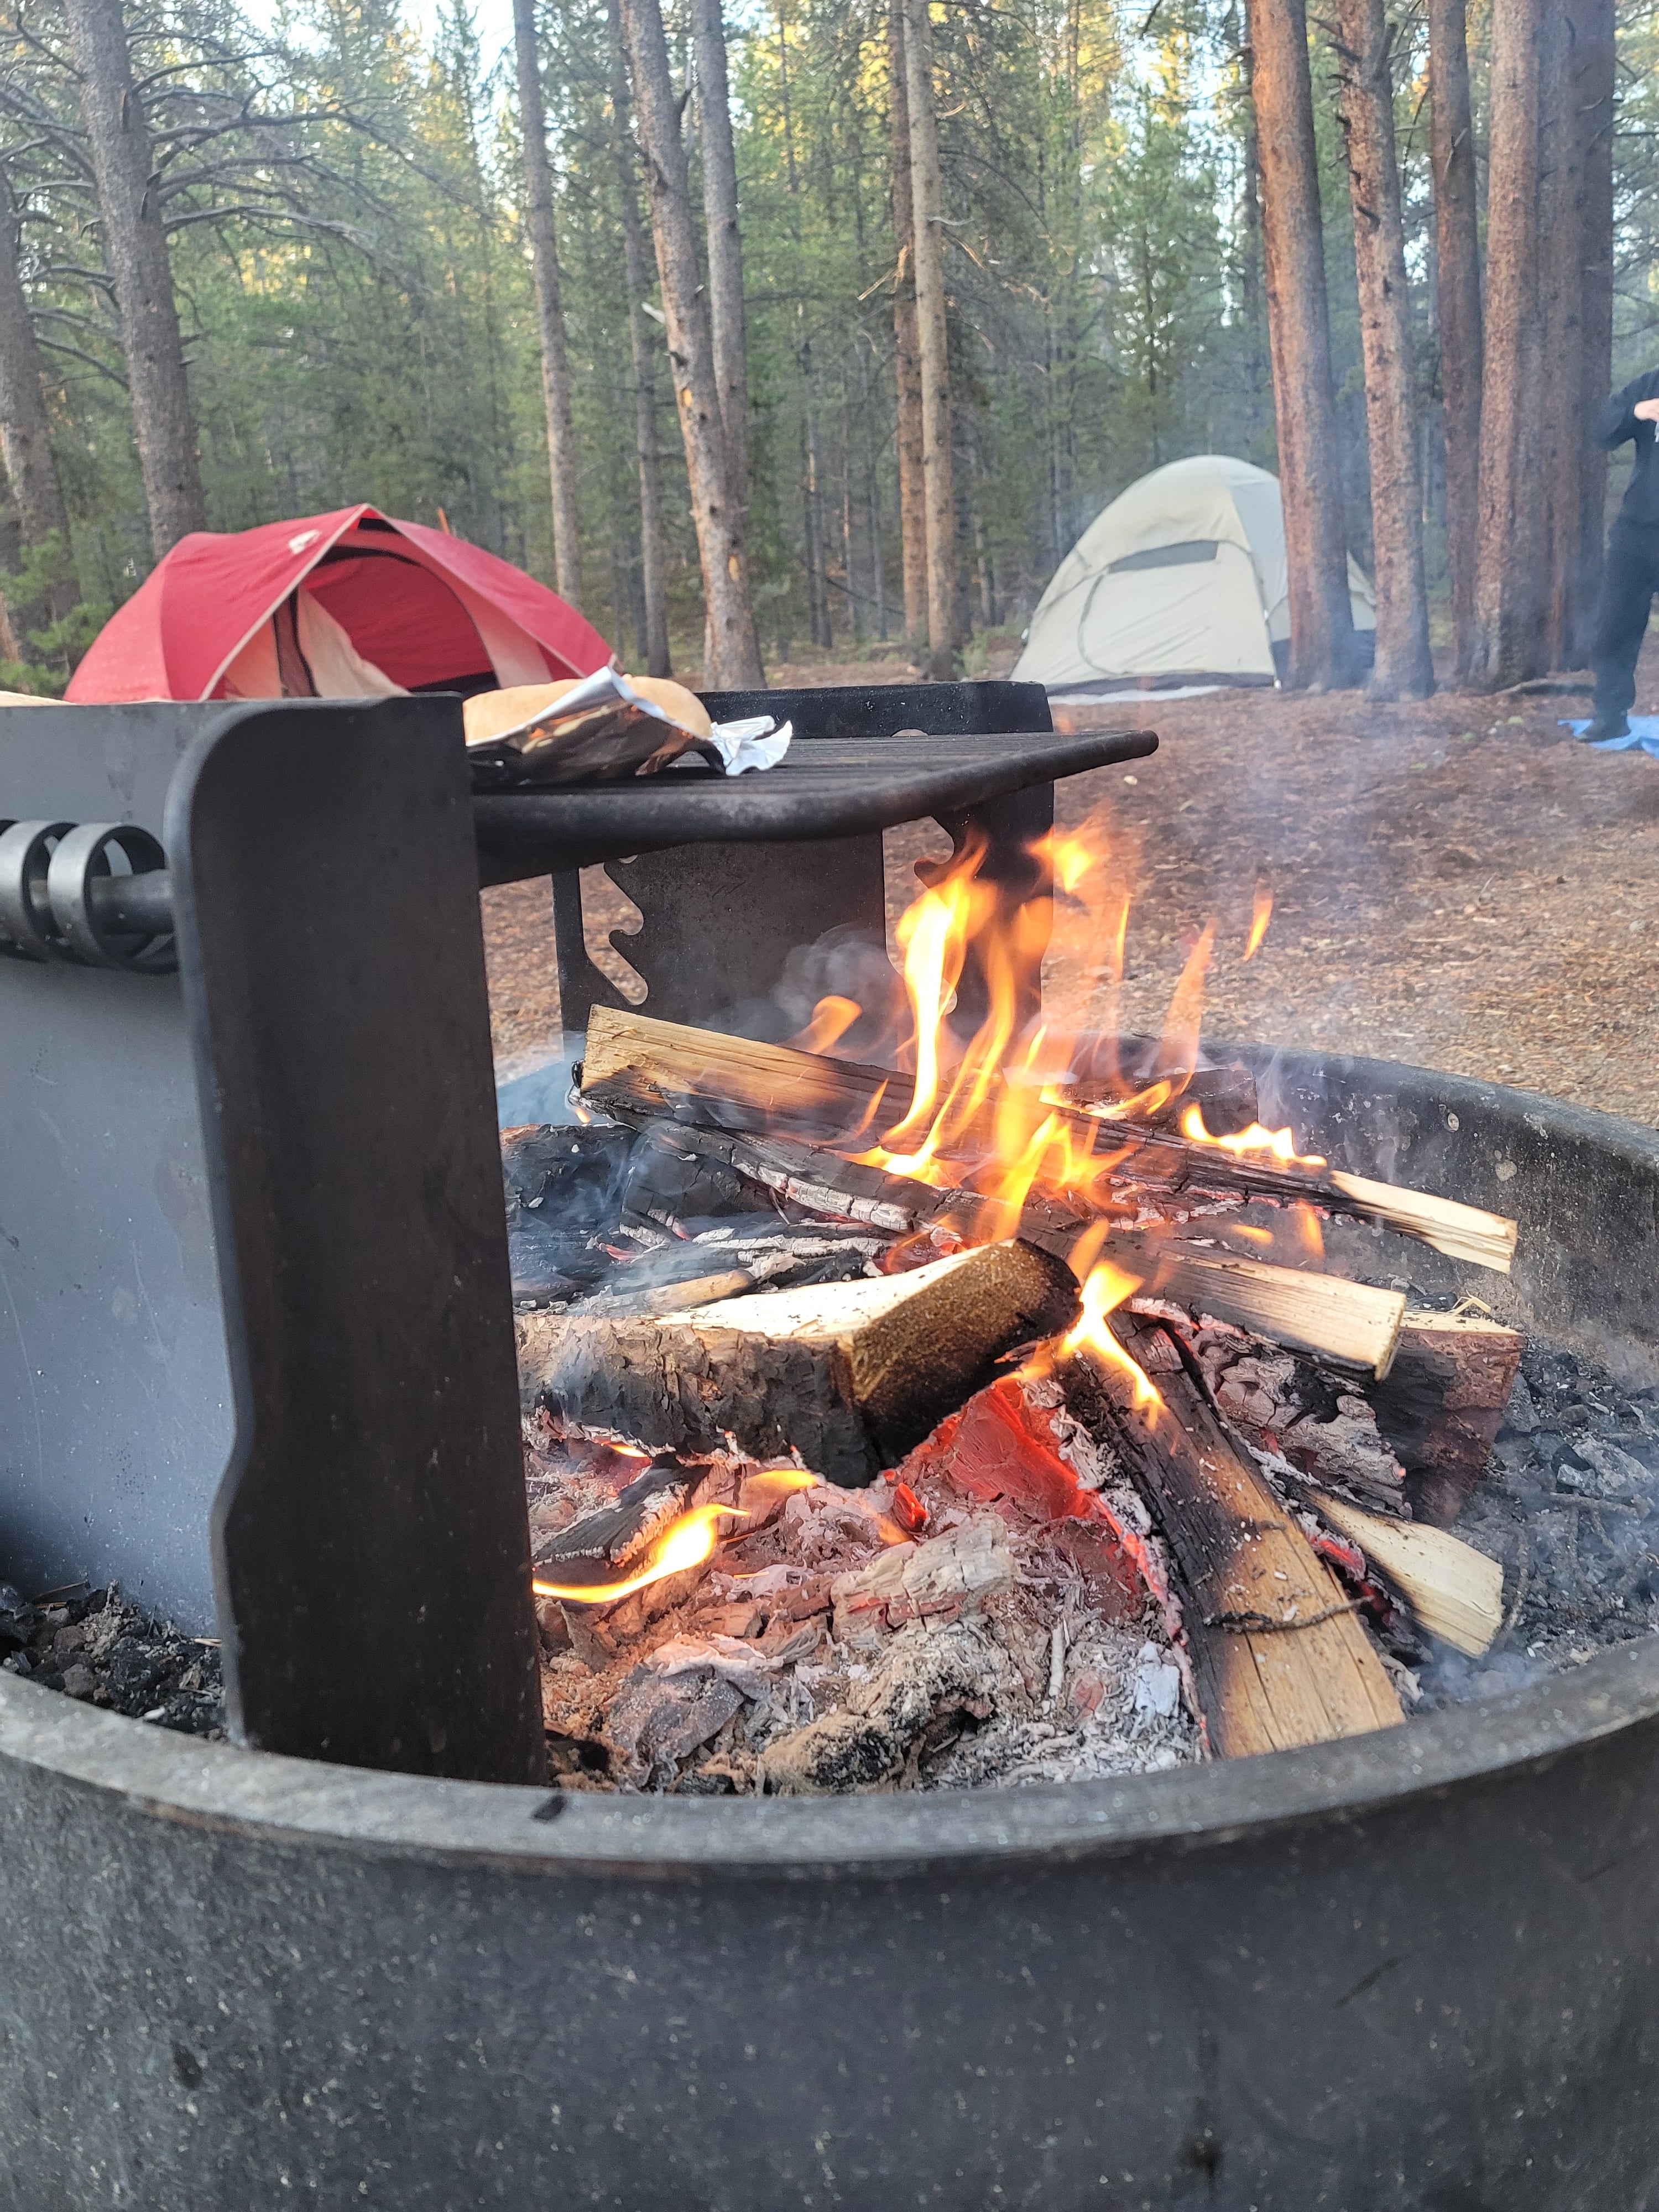 Camper submitted image from Turquoise Lake Primitive Camping - 4